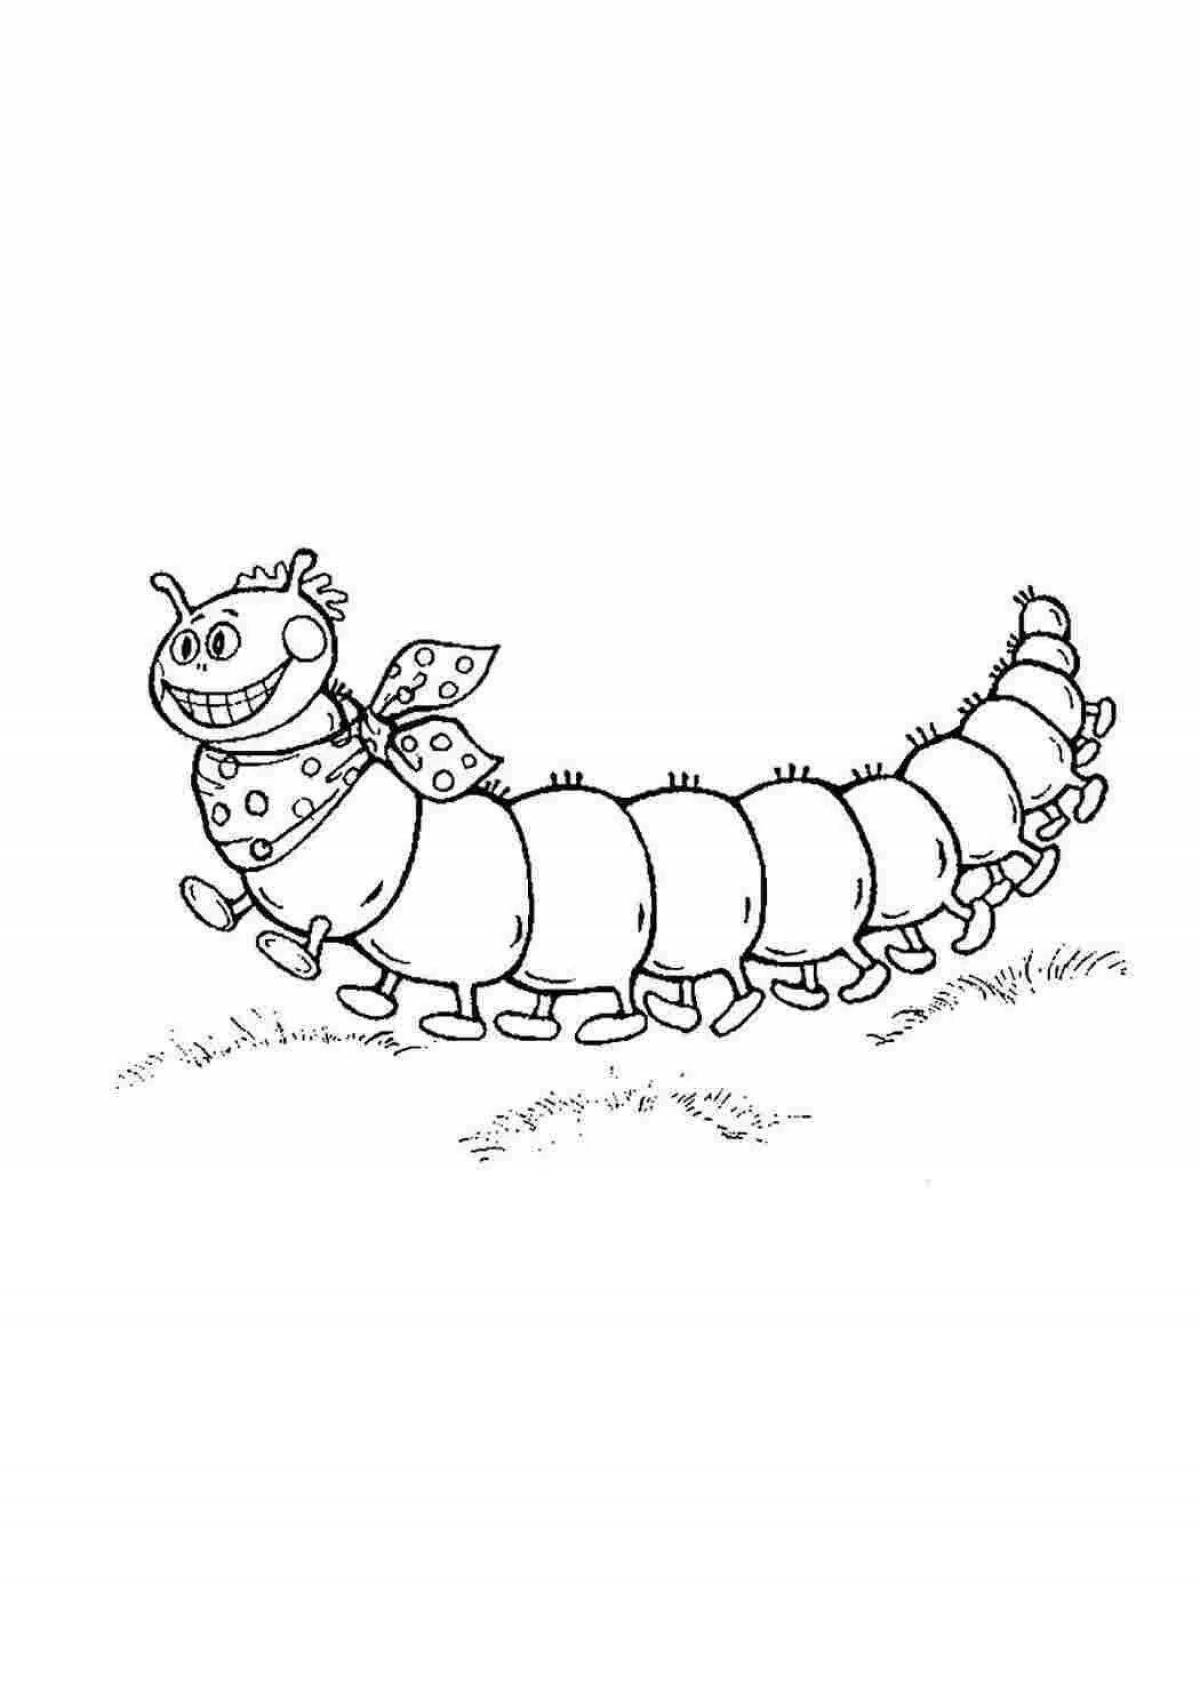 Coloring caterpillar for the little ones